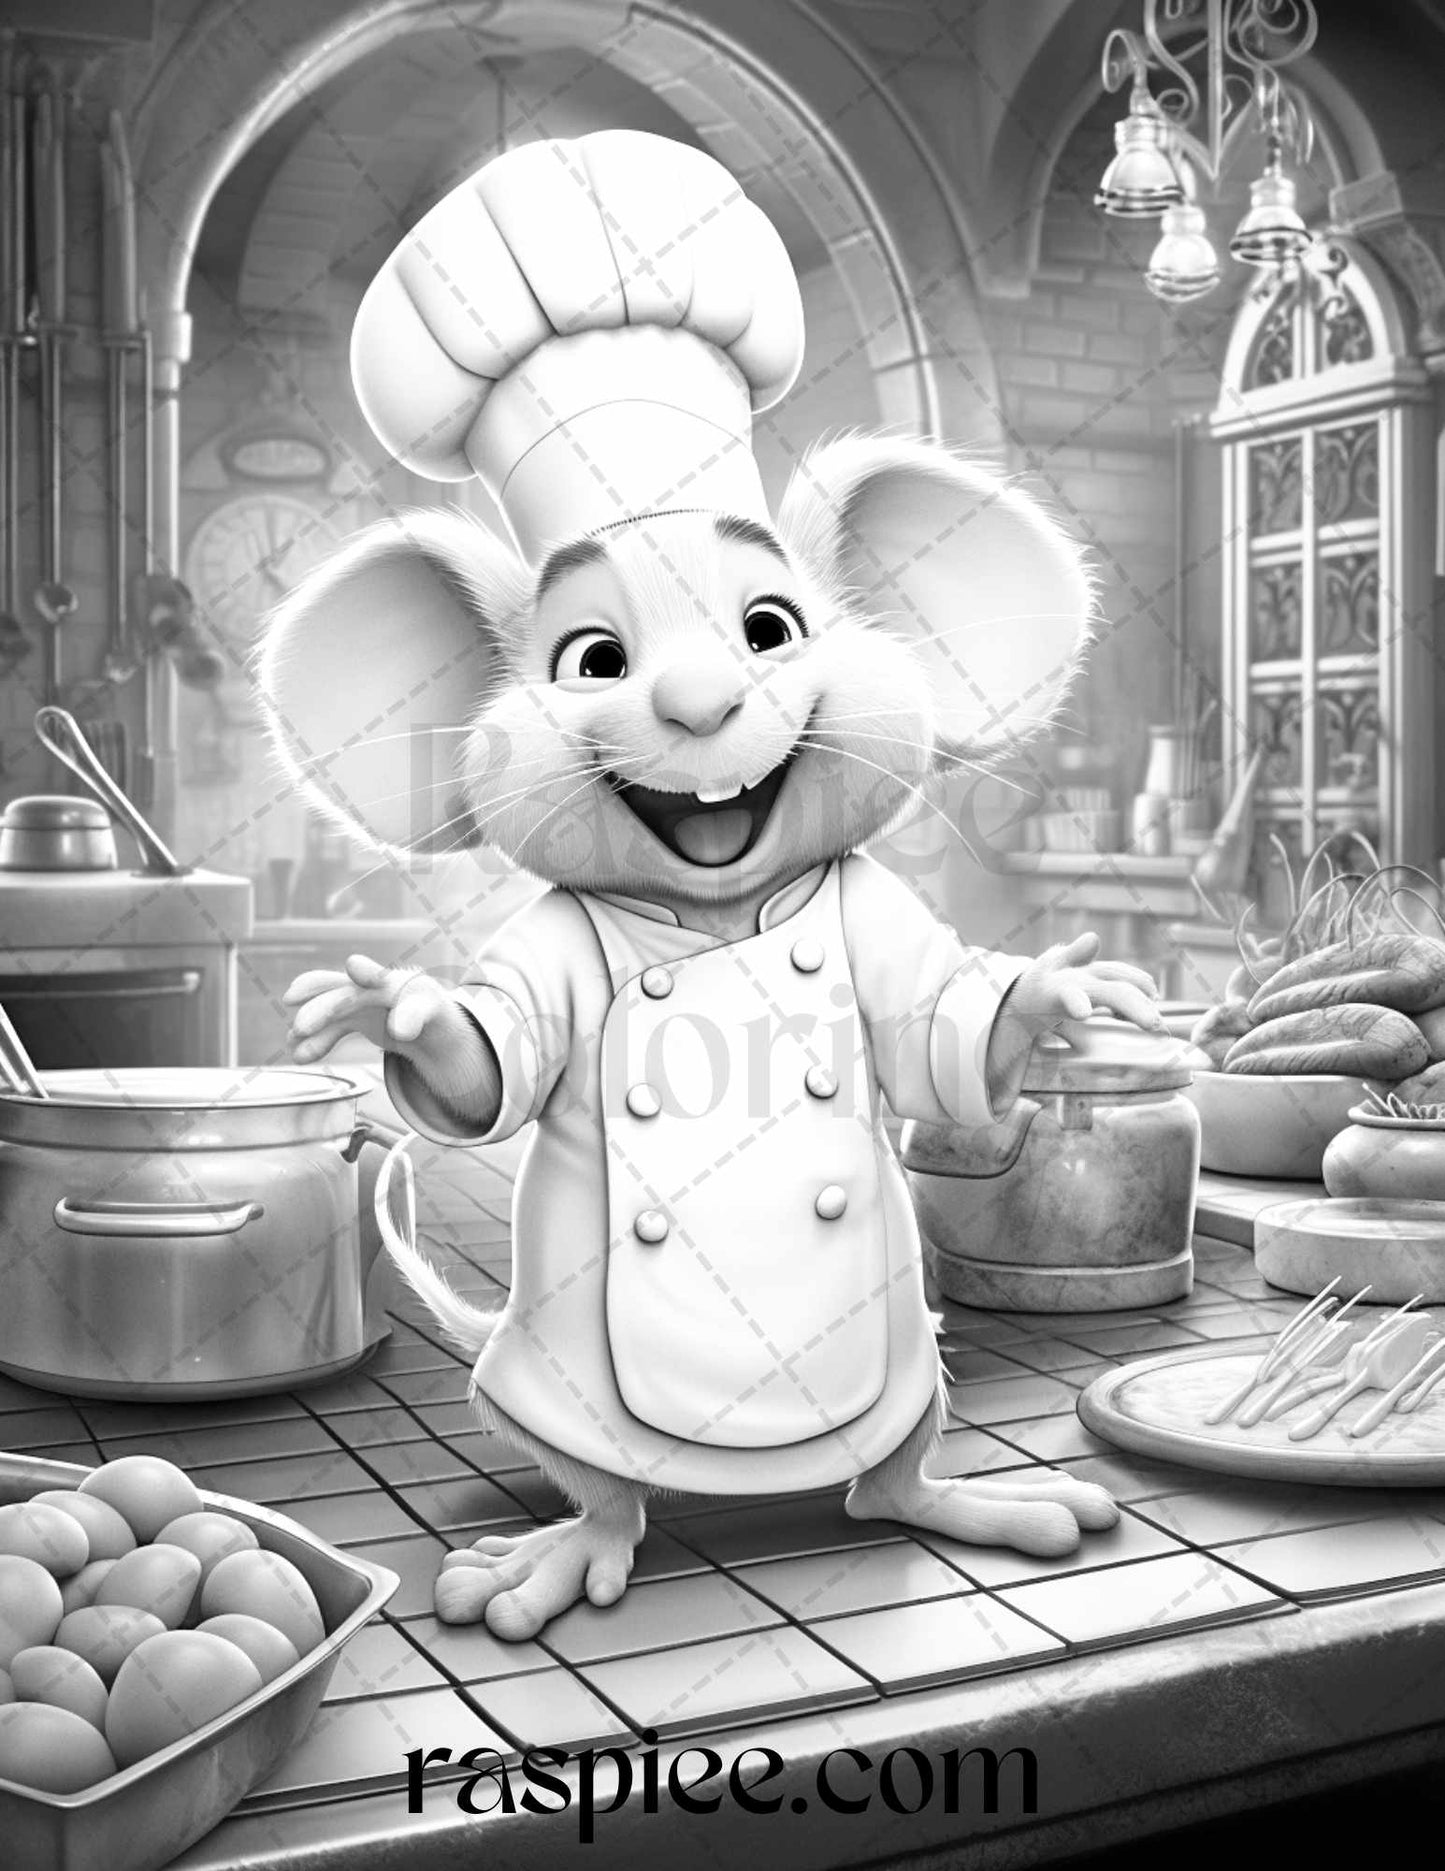 45 Mouse Chef Grayscale Coloring Pages Printable for Adults, PDF File Instant Download